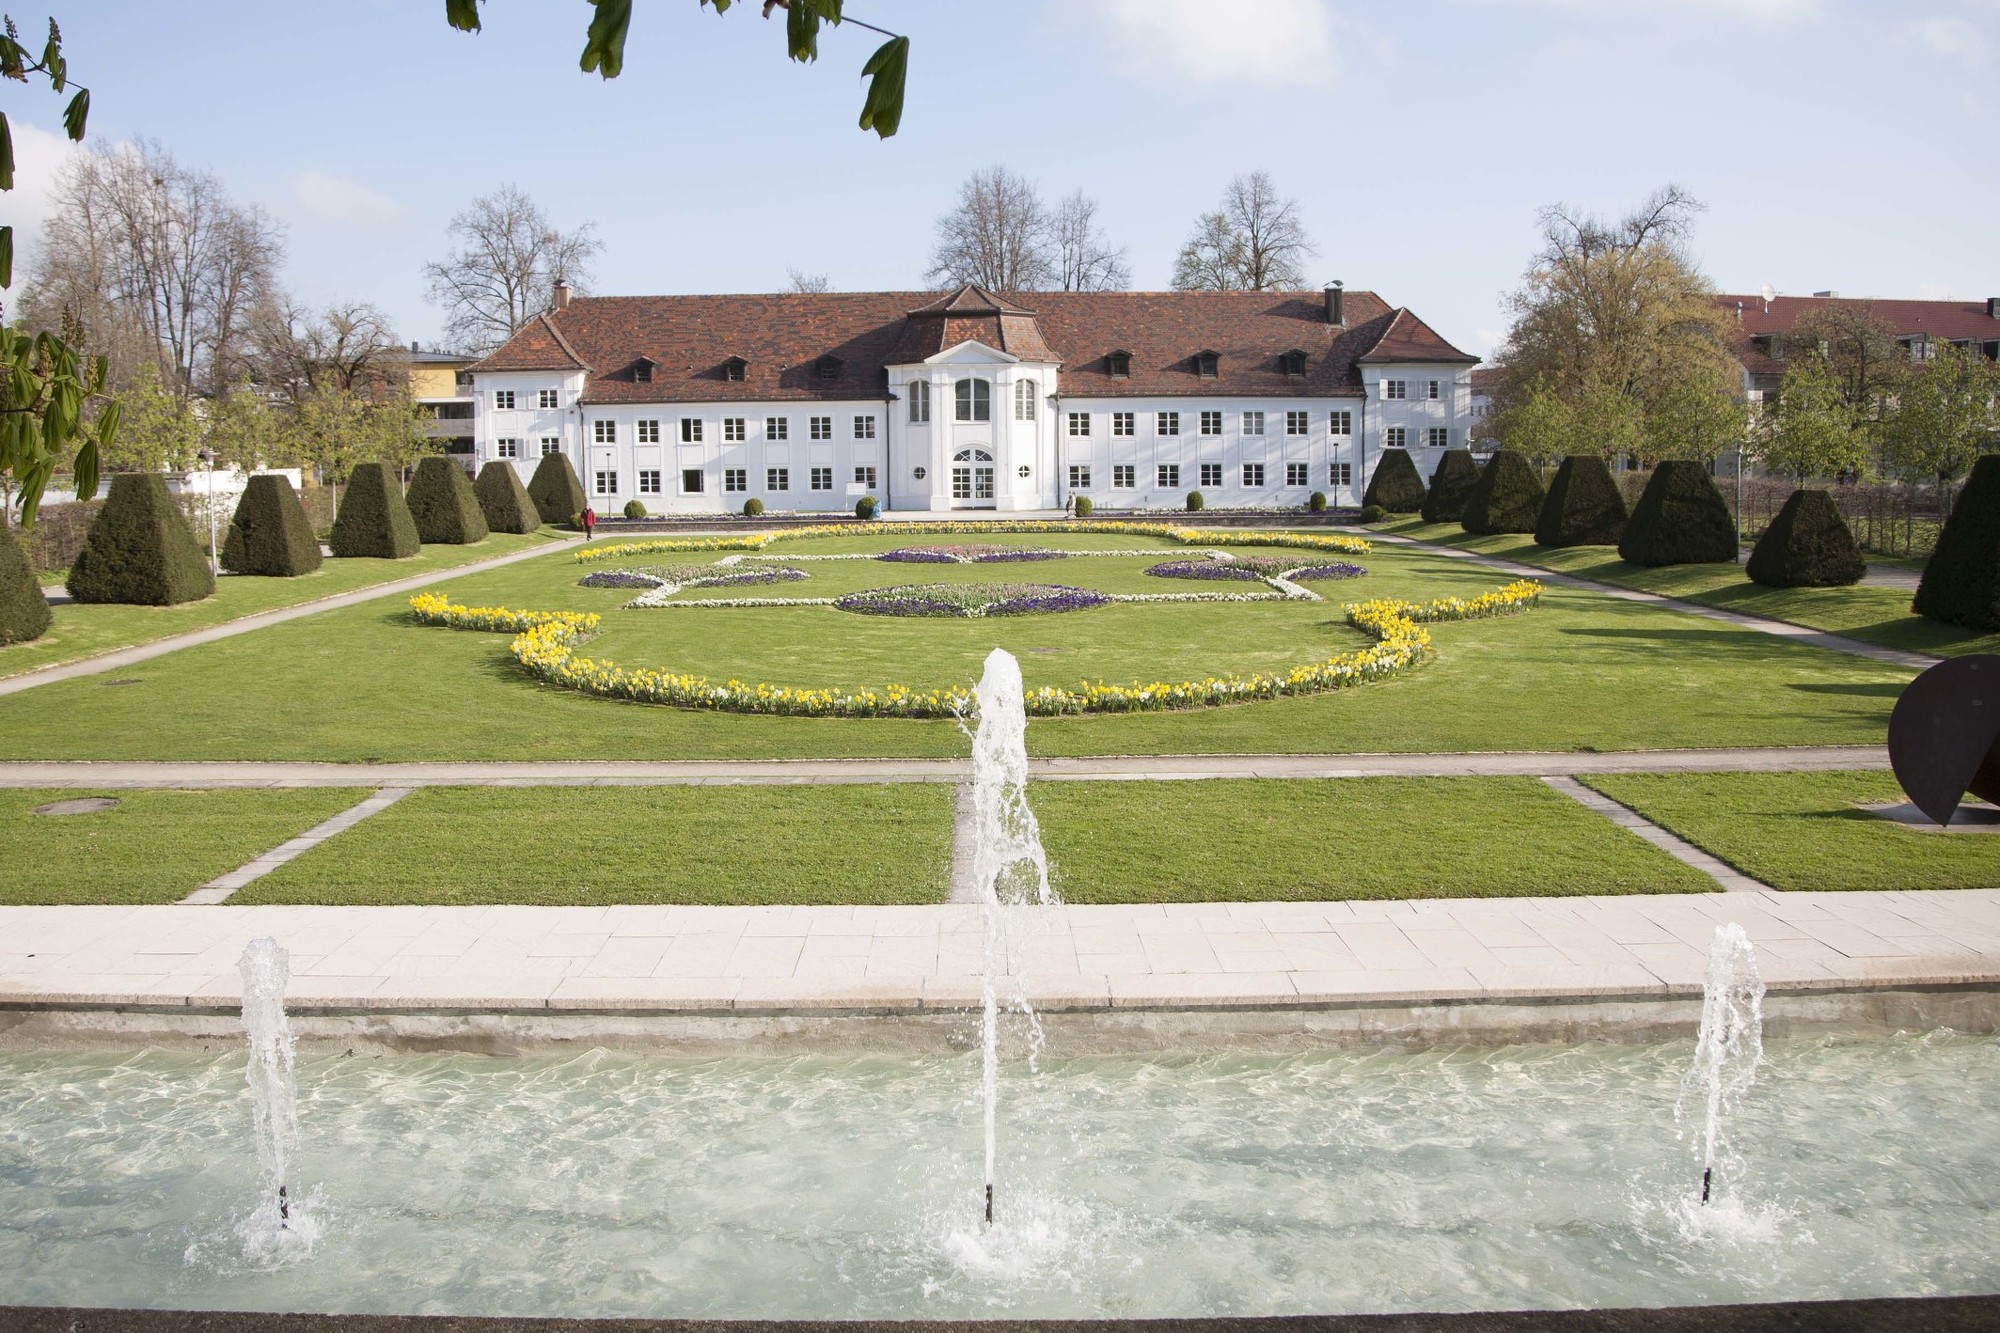 The Court Garden with a view of the Orangery Kempten